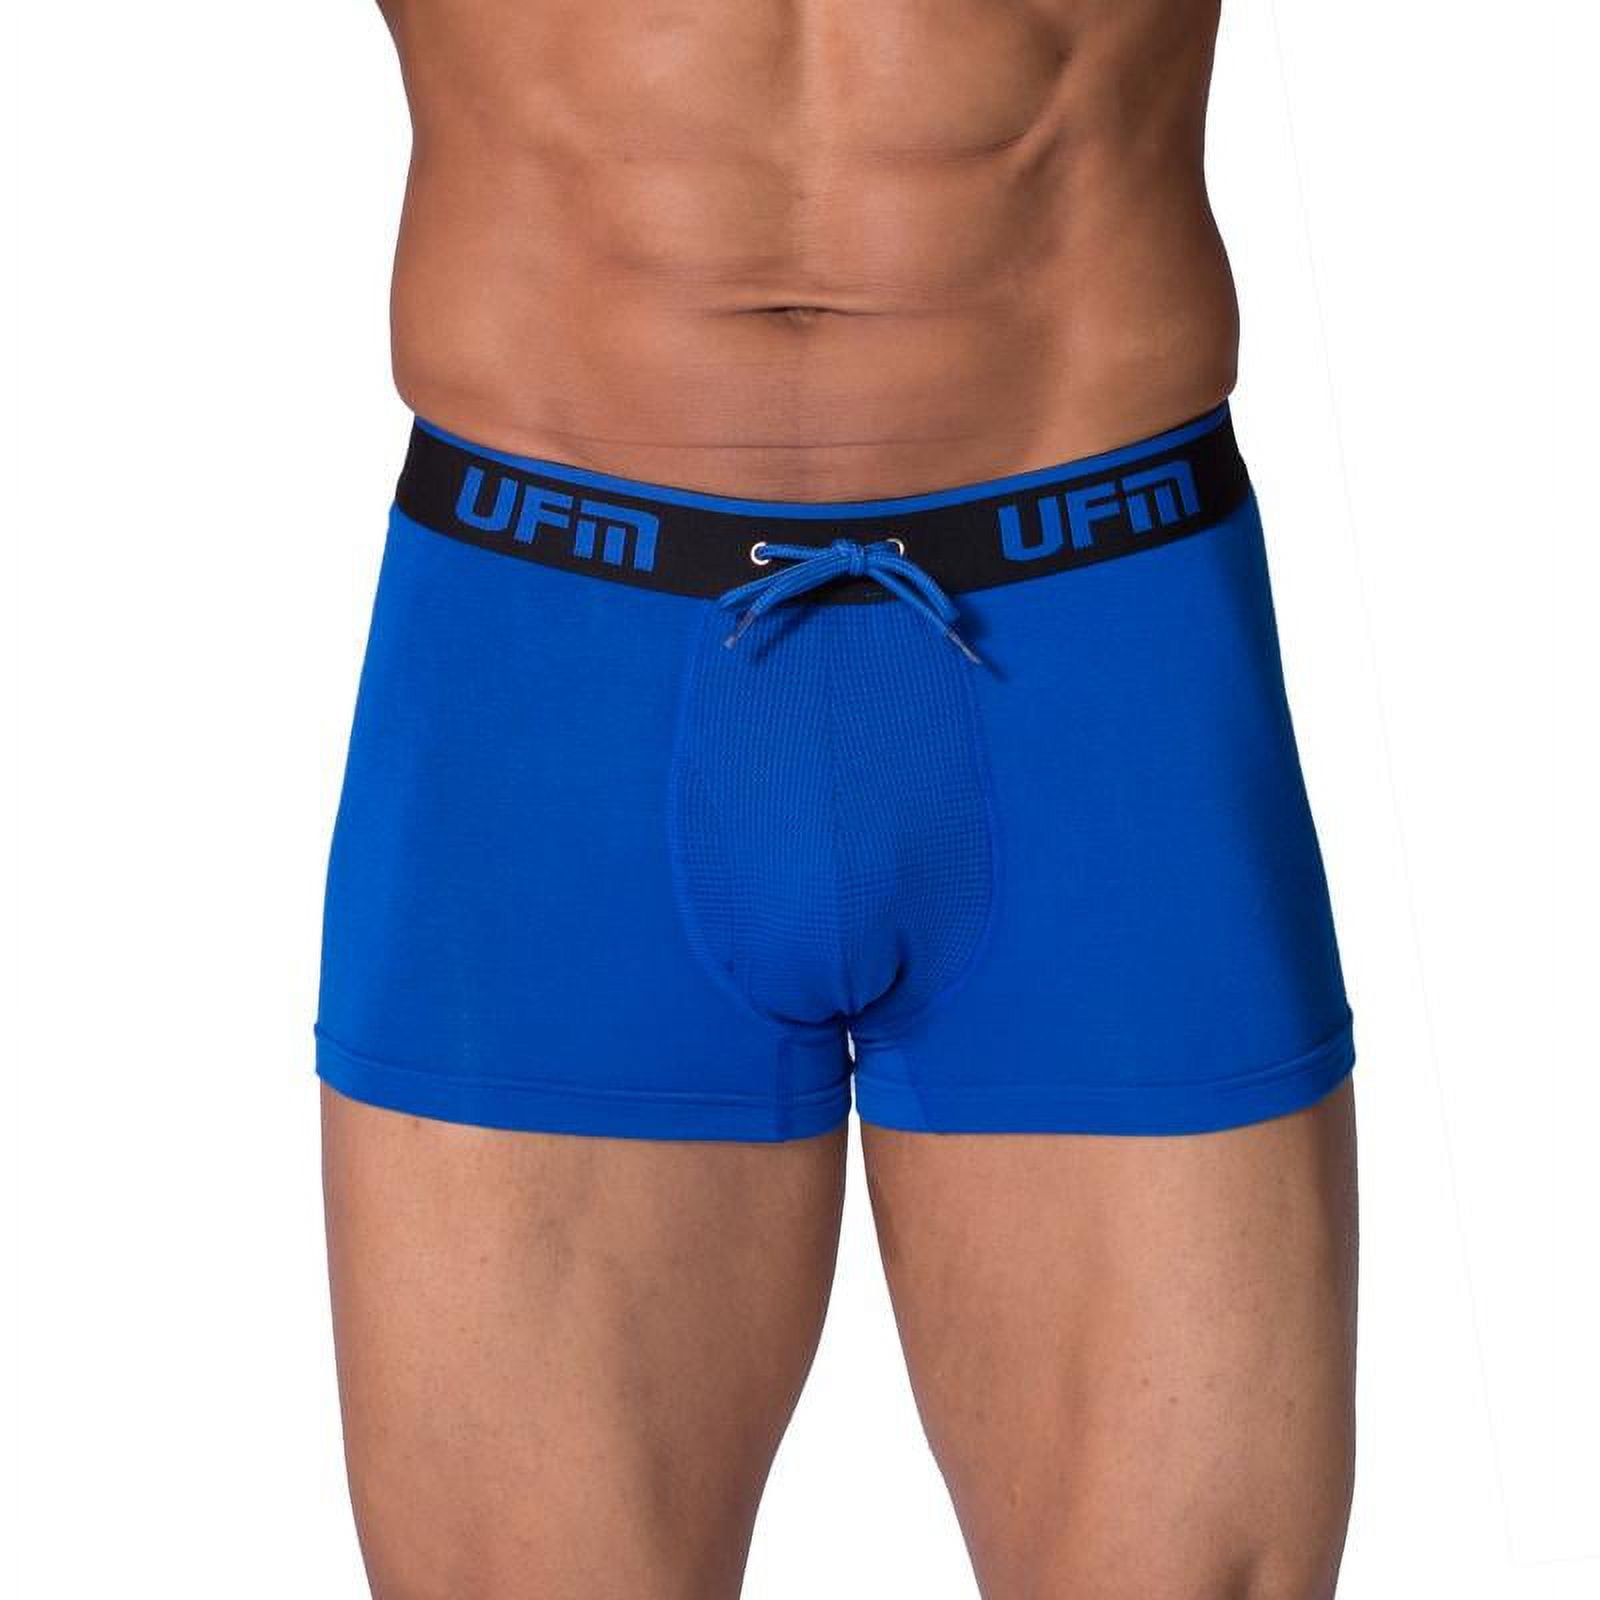  UFM Men's Polyester Trunk w/Patented Adjustable Support Pouch  Underwear for Men Royal Blue : Clothing, Shoes & Jewelry